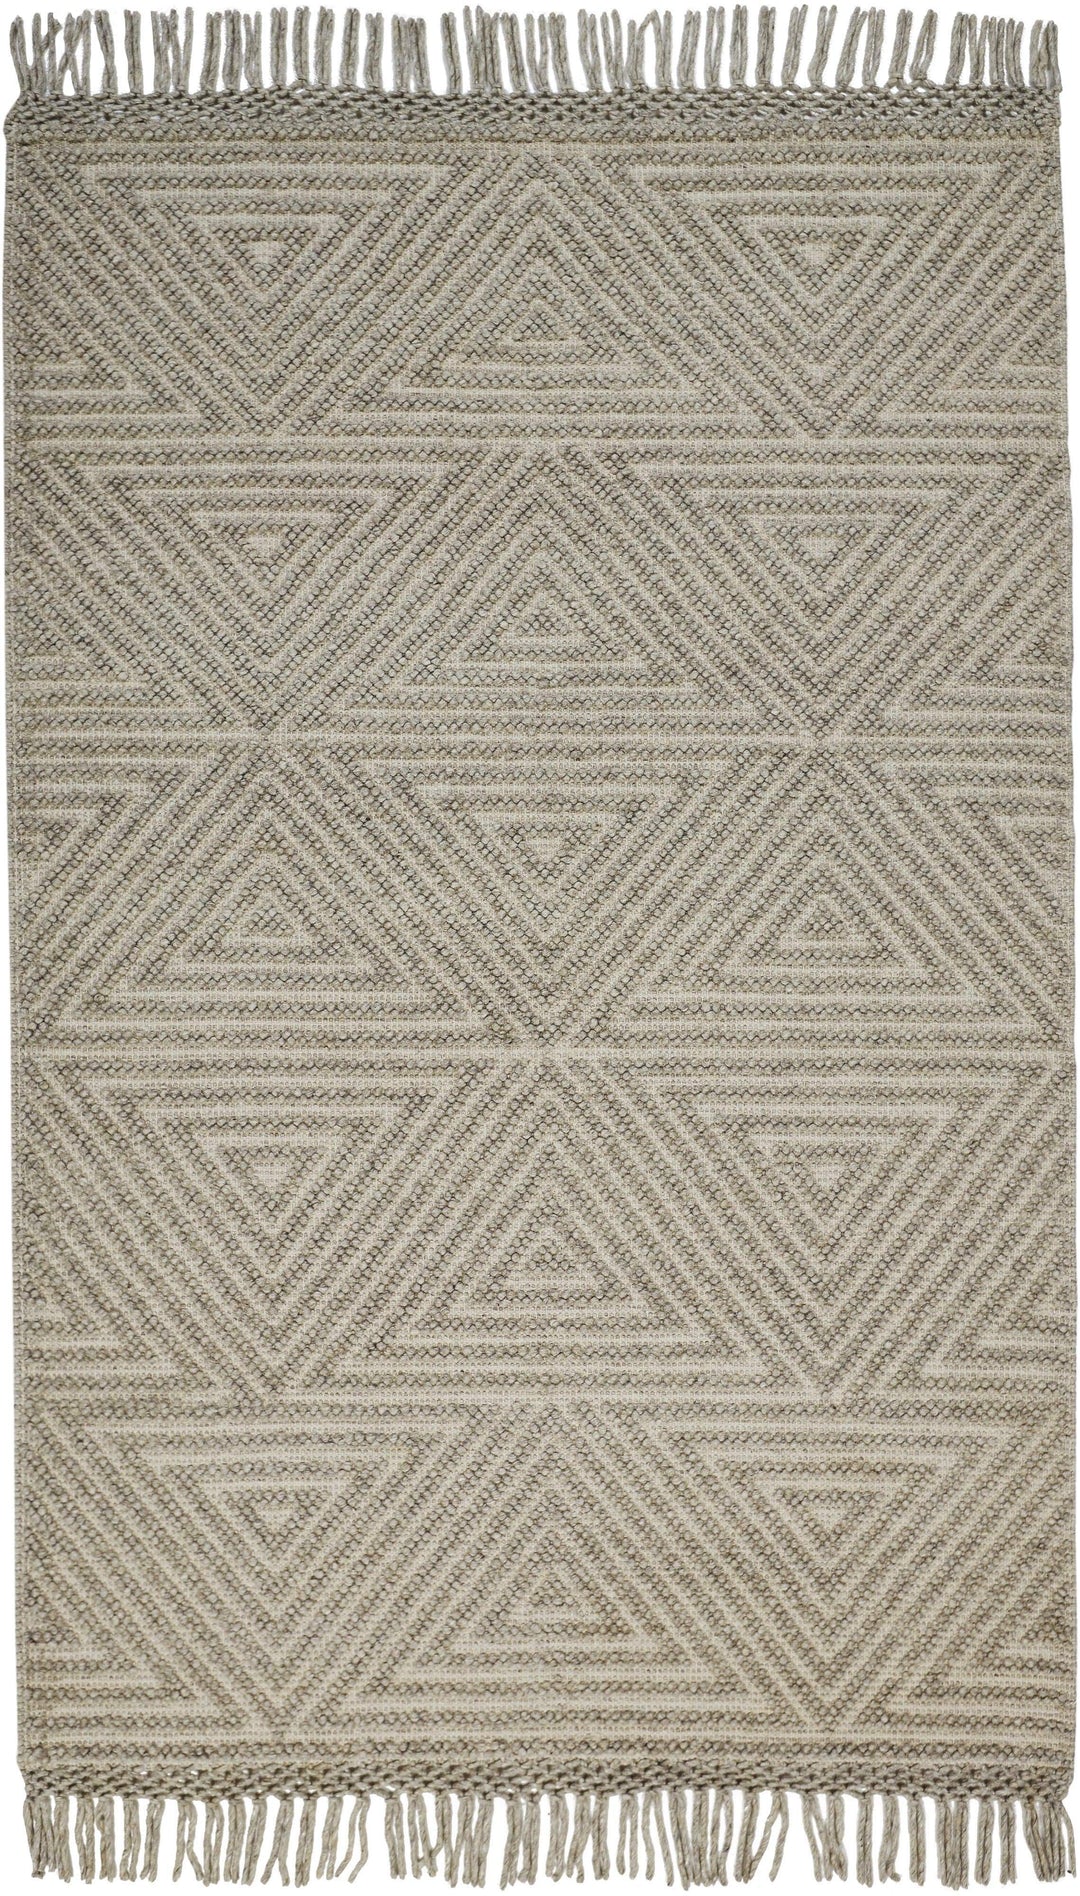 Feizy Feizy Phoenix Contemporary Moroccan Style Rug - Natural Tan - Available in 4 Sizes 3'-6" x 5'-6" 8820810FSTN000C50